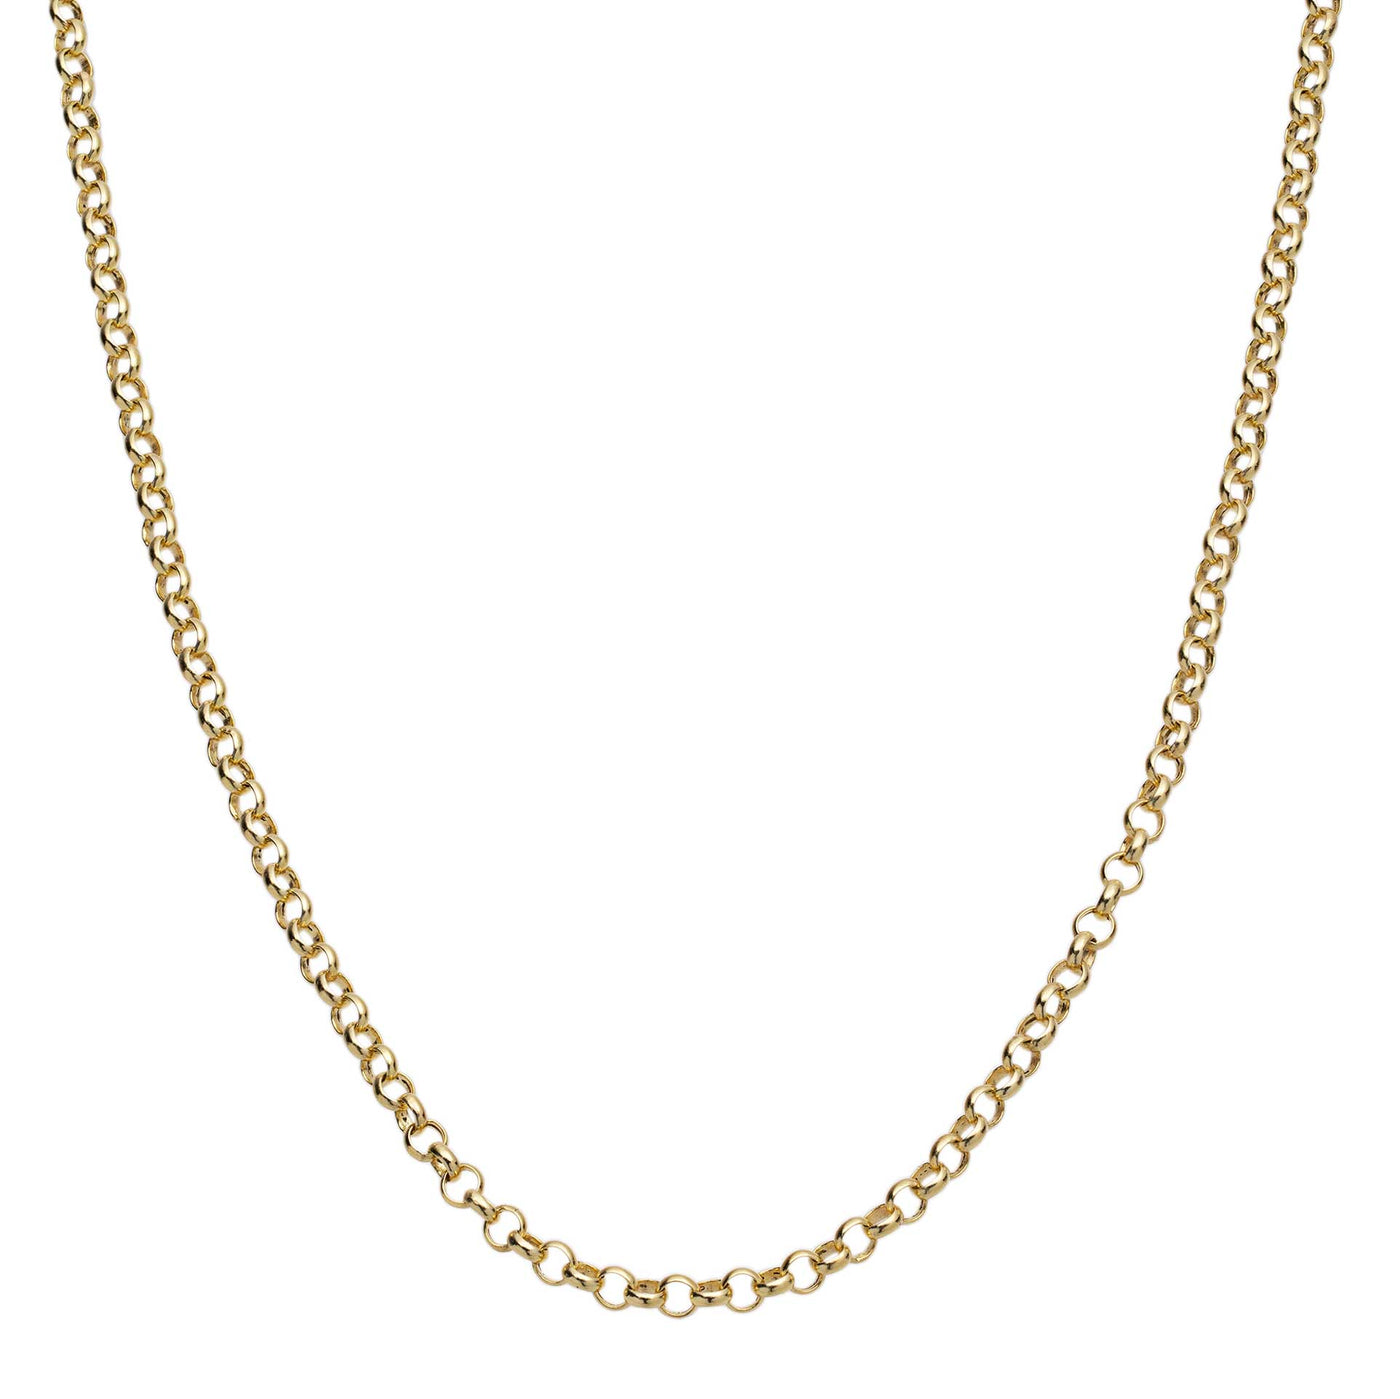 Round Rolo Link Chain Necklace 10K Yellow Gold - Hollow